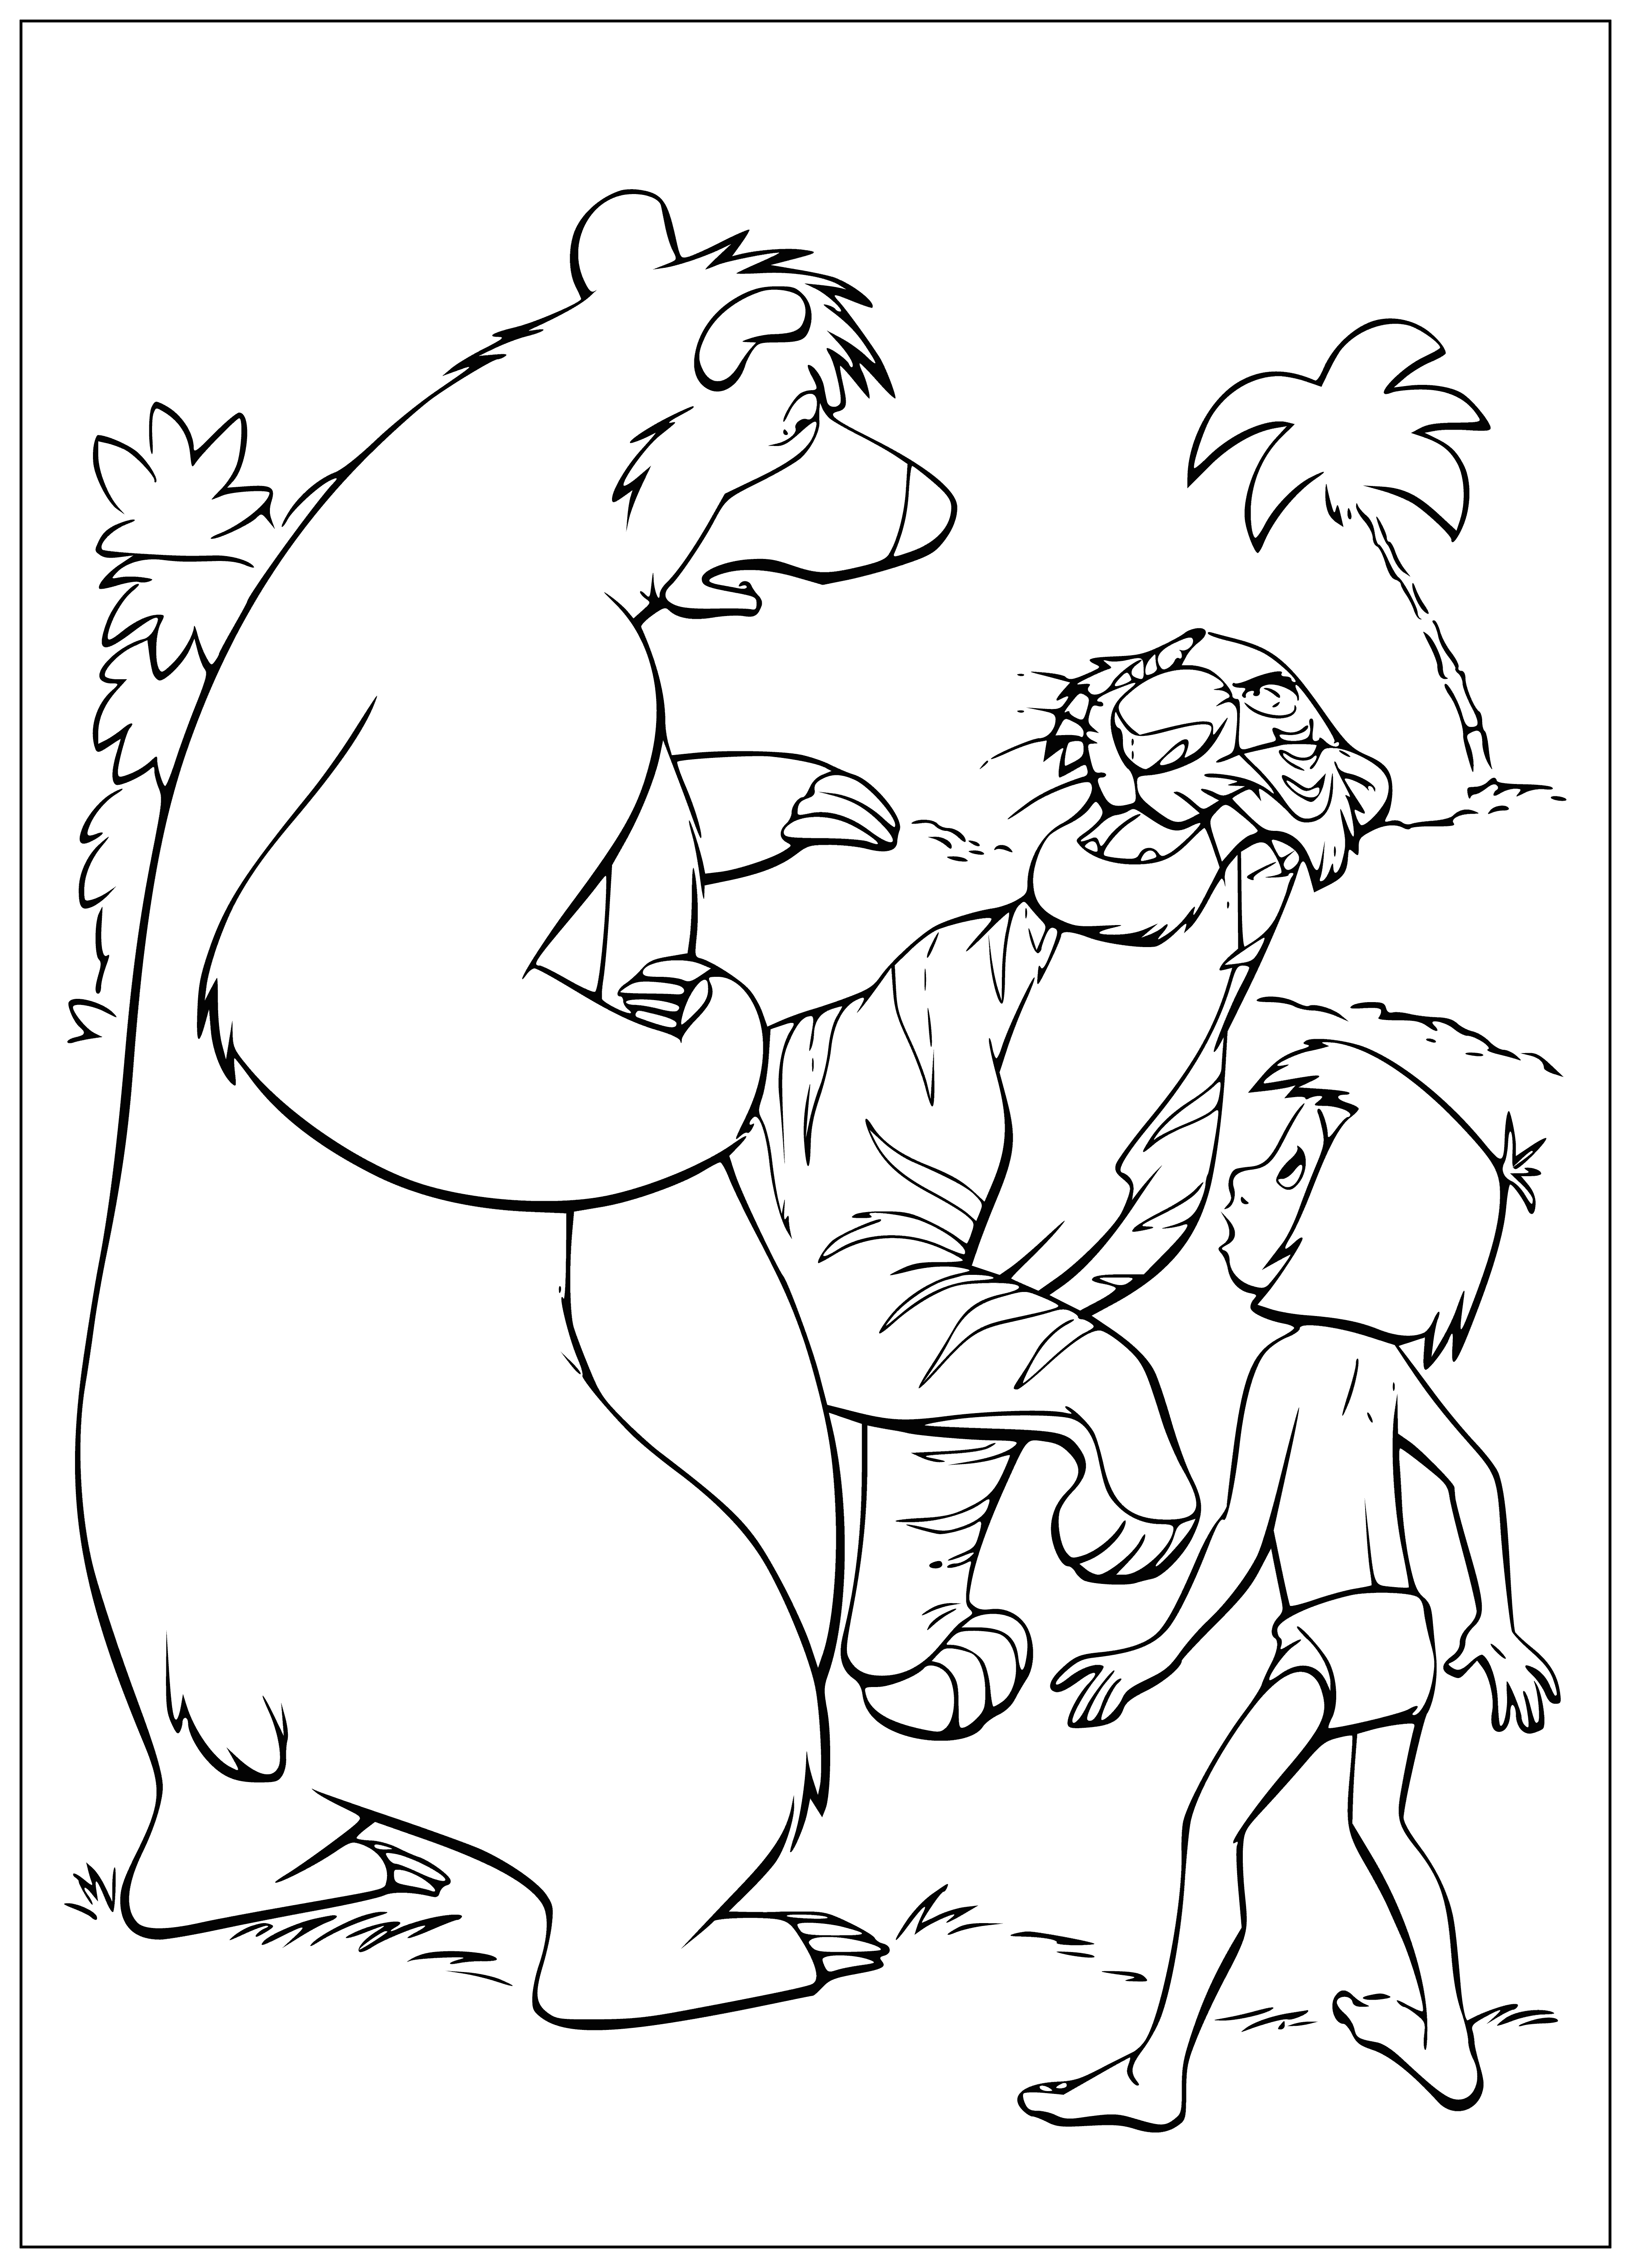 A meeting coloring page